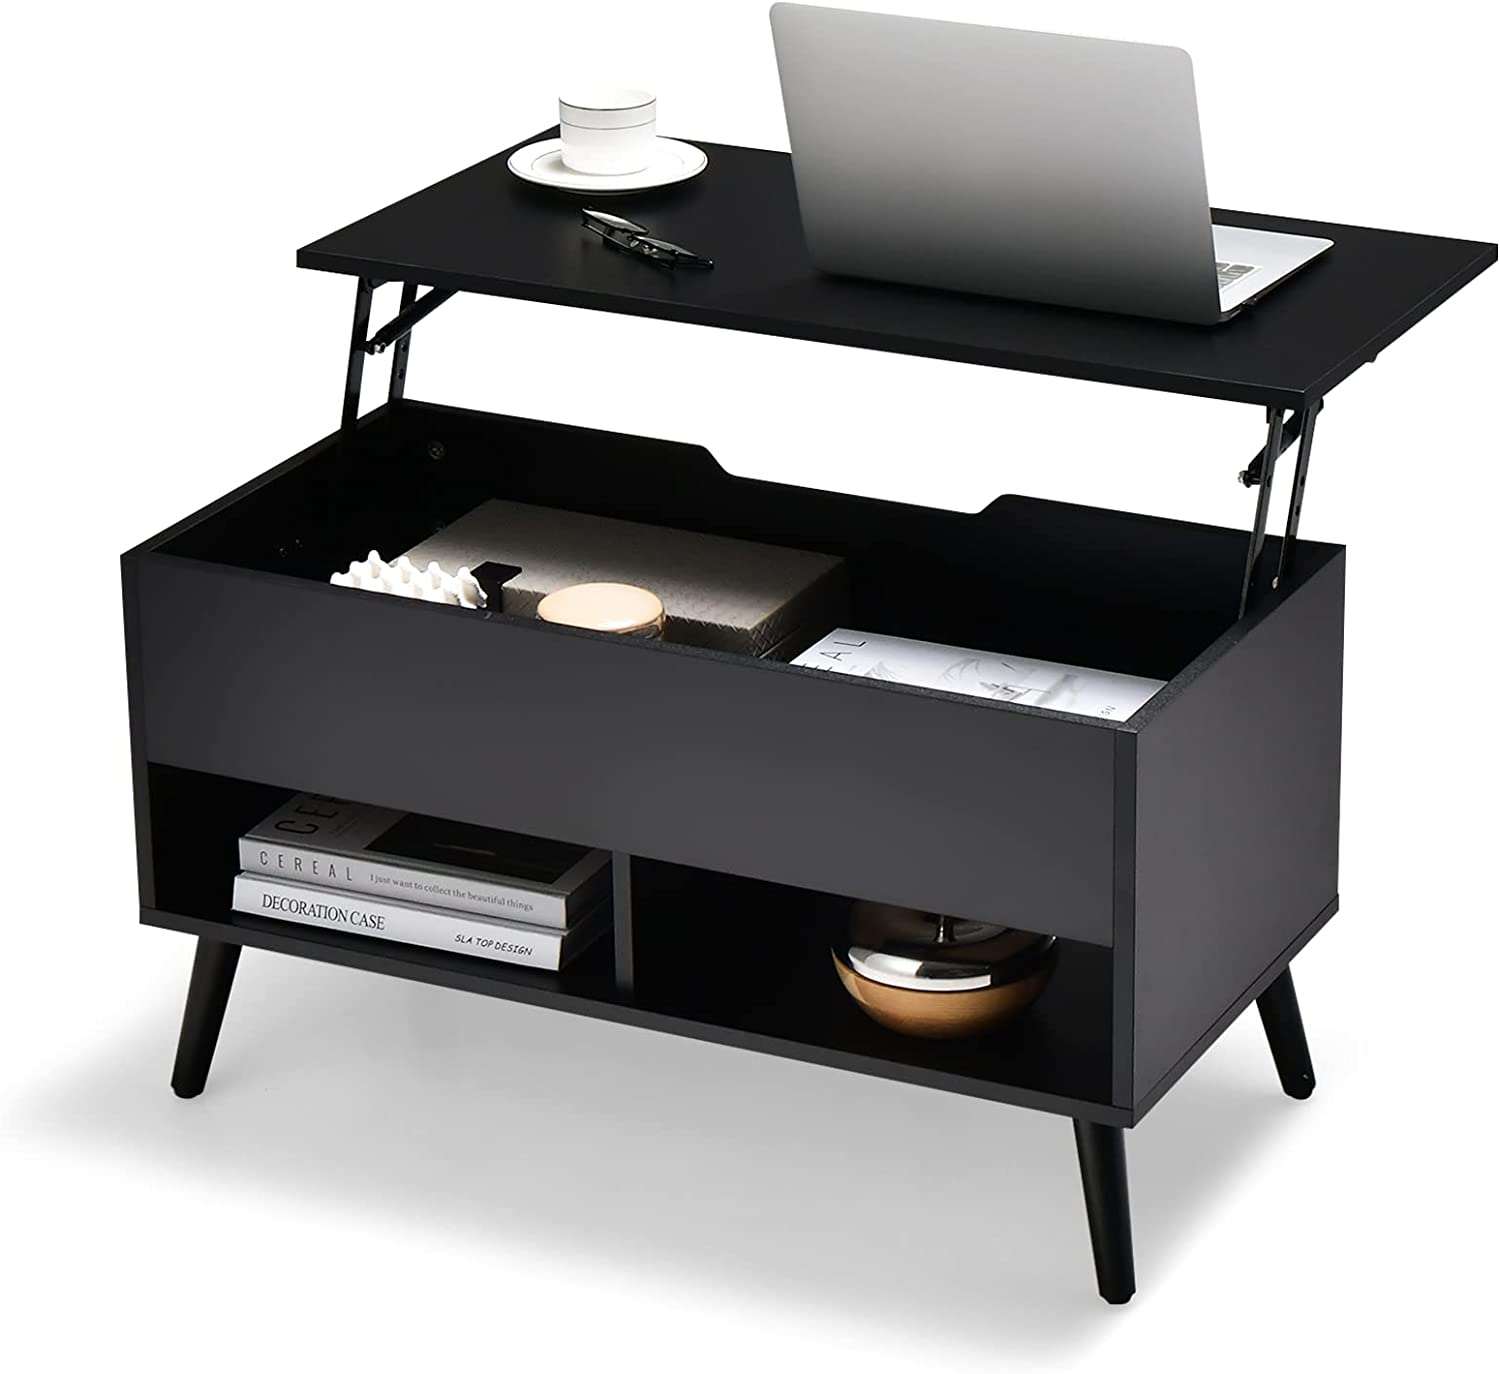 Giantex Lift Top Coffee Table, Modern Cocktail Table w/Hidden Compartment & 2 Open Shelves